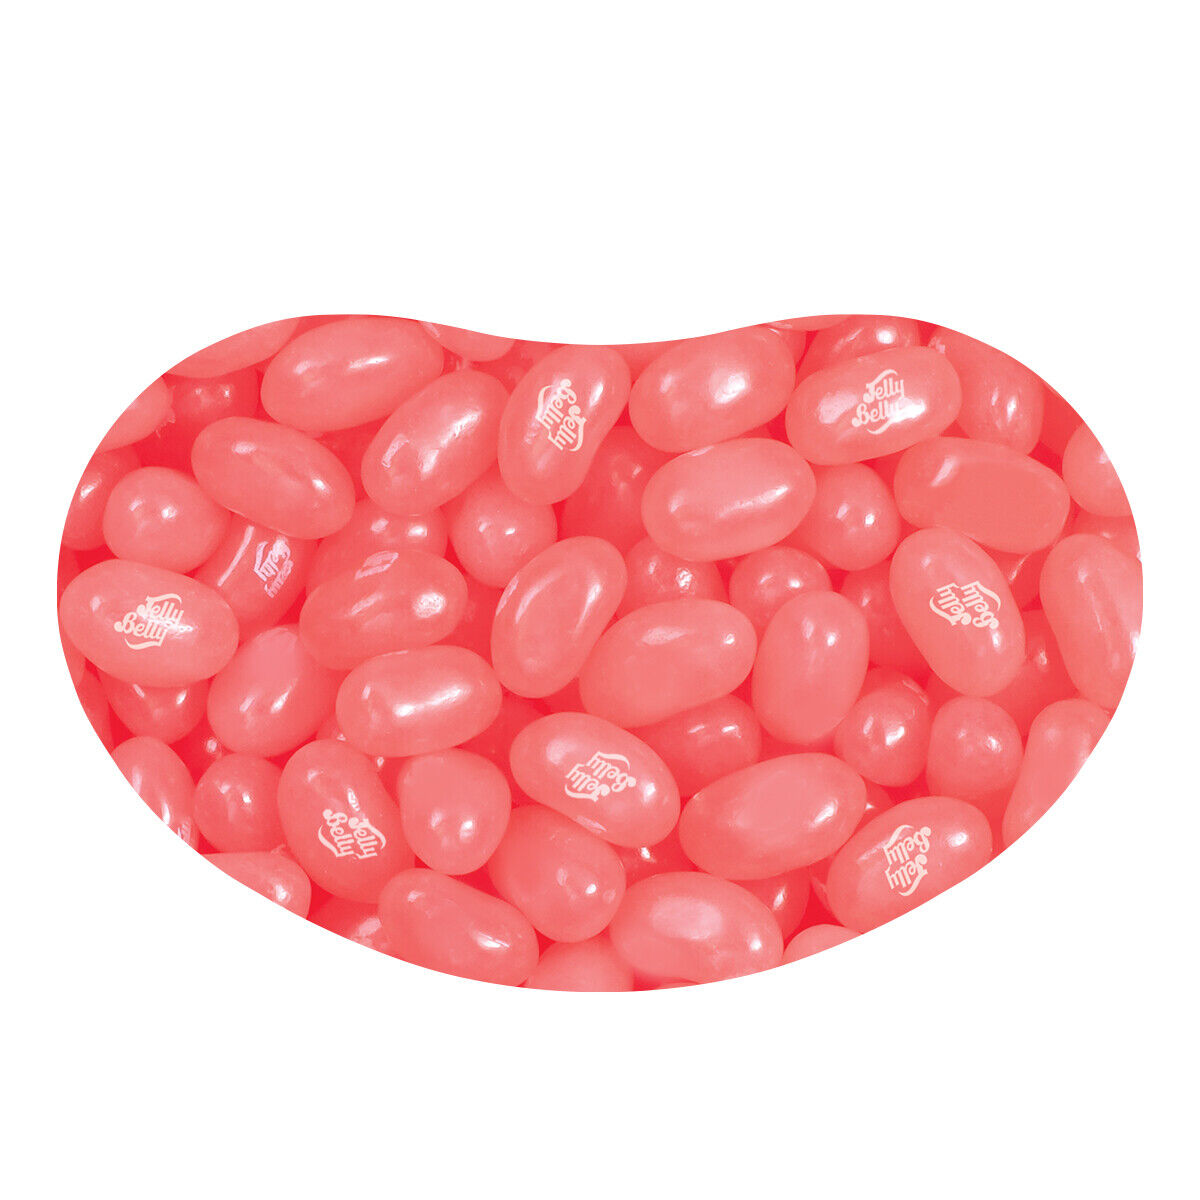 Cotton Candy Jelly Beans Bag